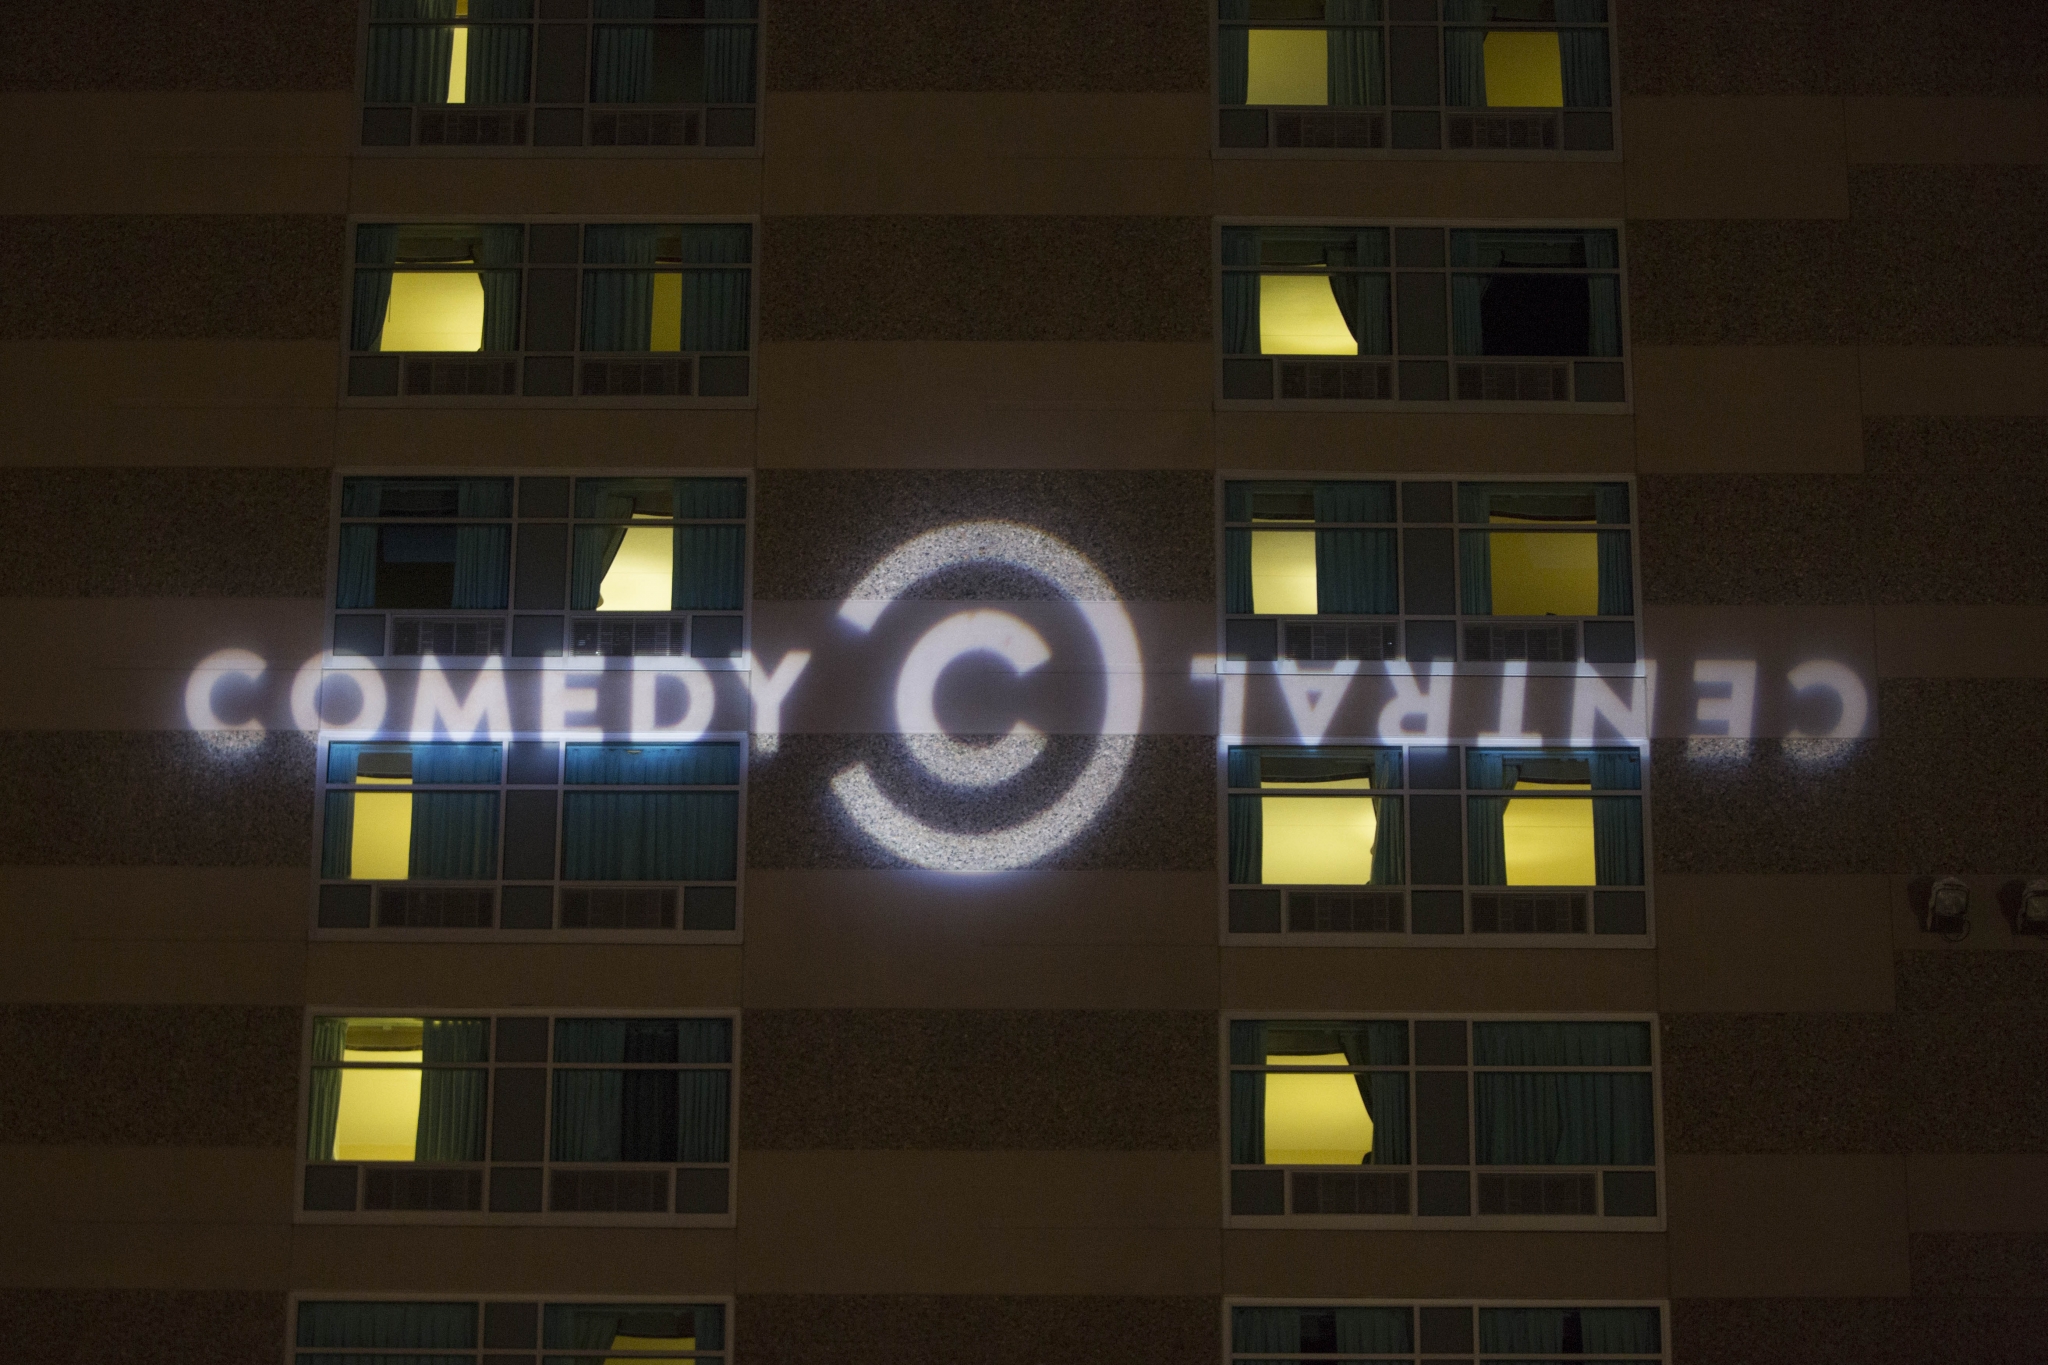 Comedy Central has mysterious plans for a comedy festival in San